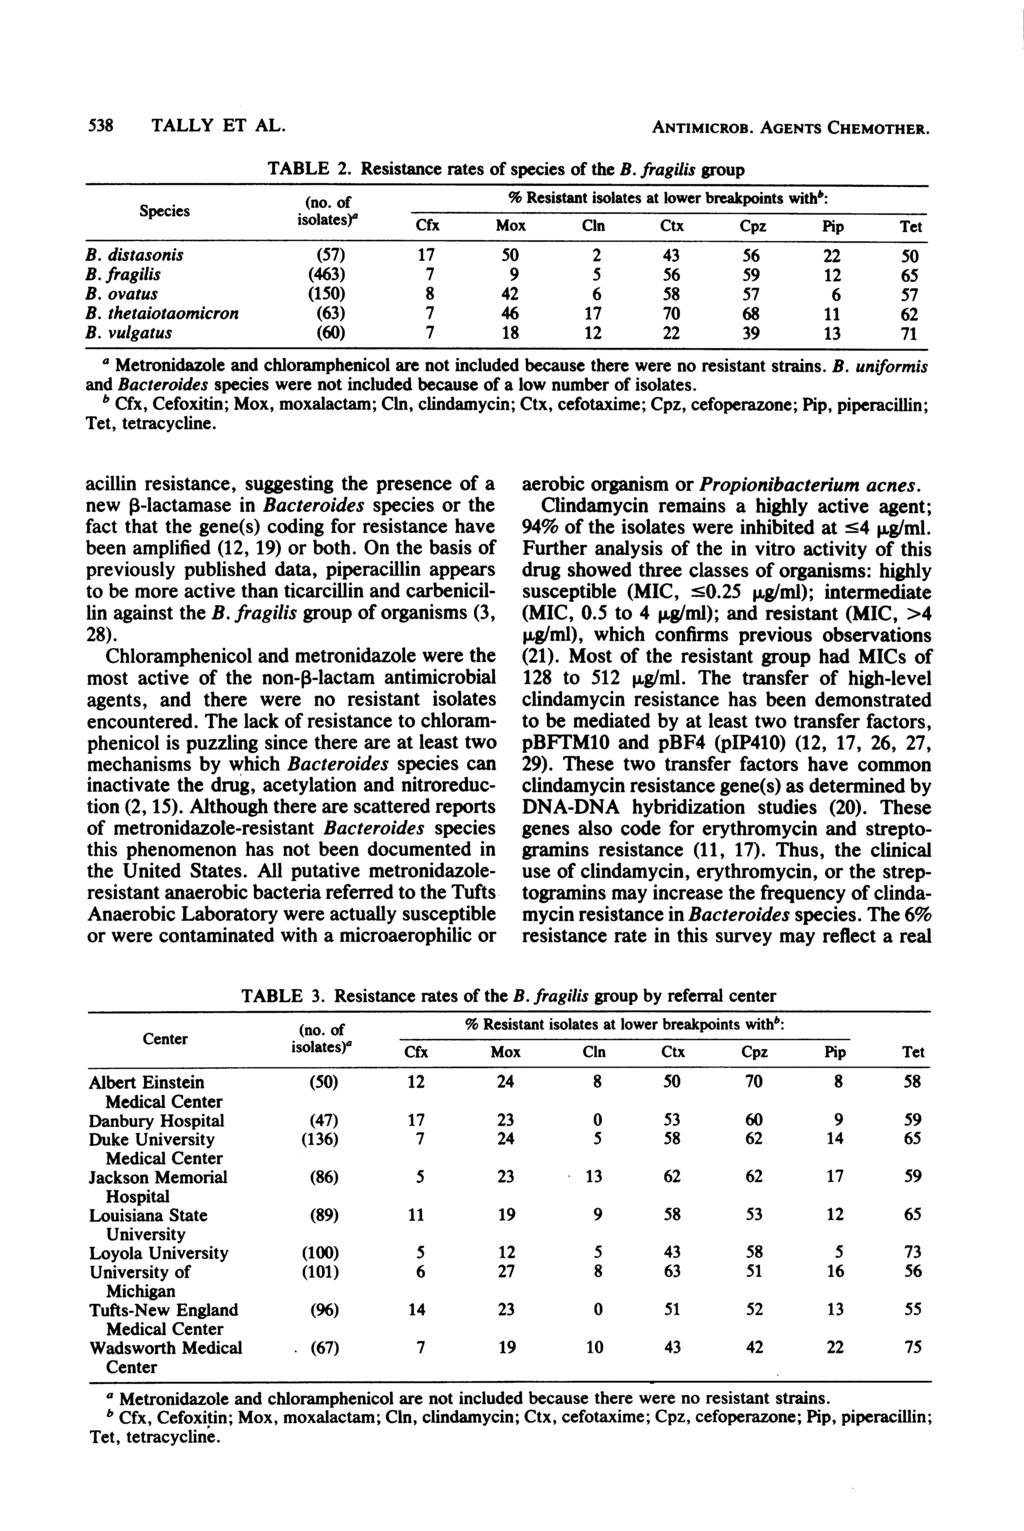 538 TALLY ET AL. TABLE 2. Resistance rates of species of the B. fragilis group ANTIMICROB. AGENTS CHEMOTHER. (no.